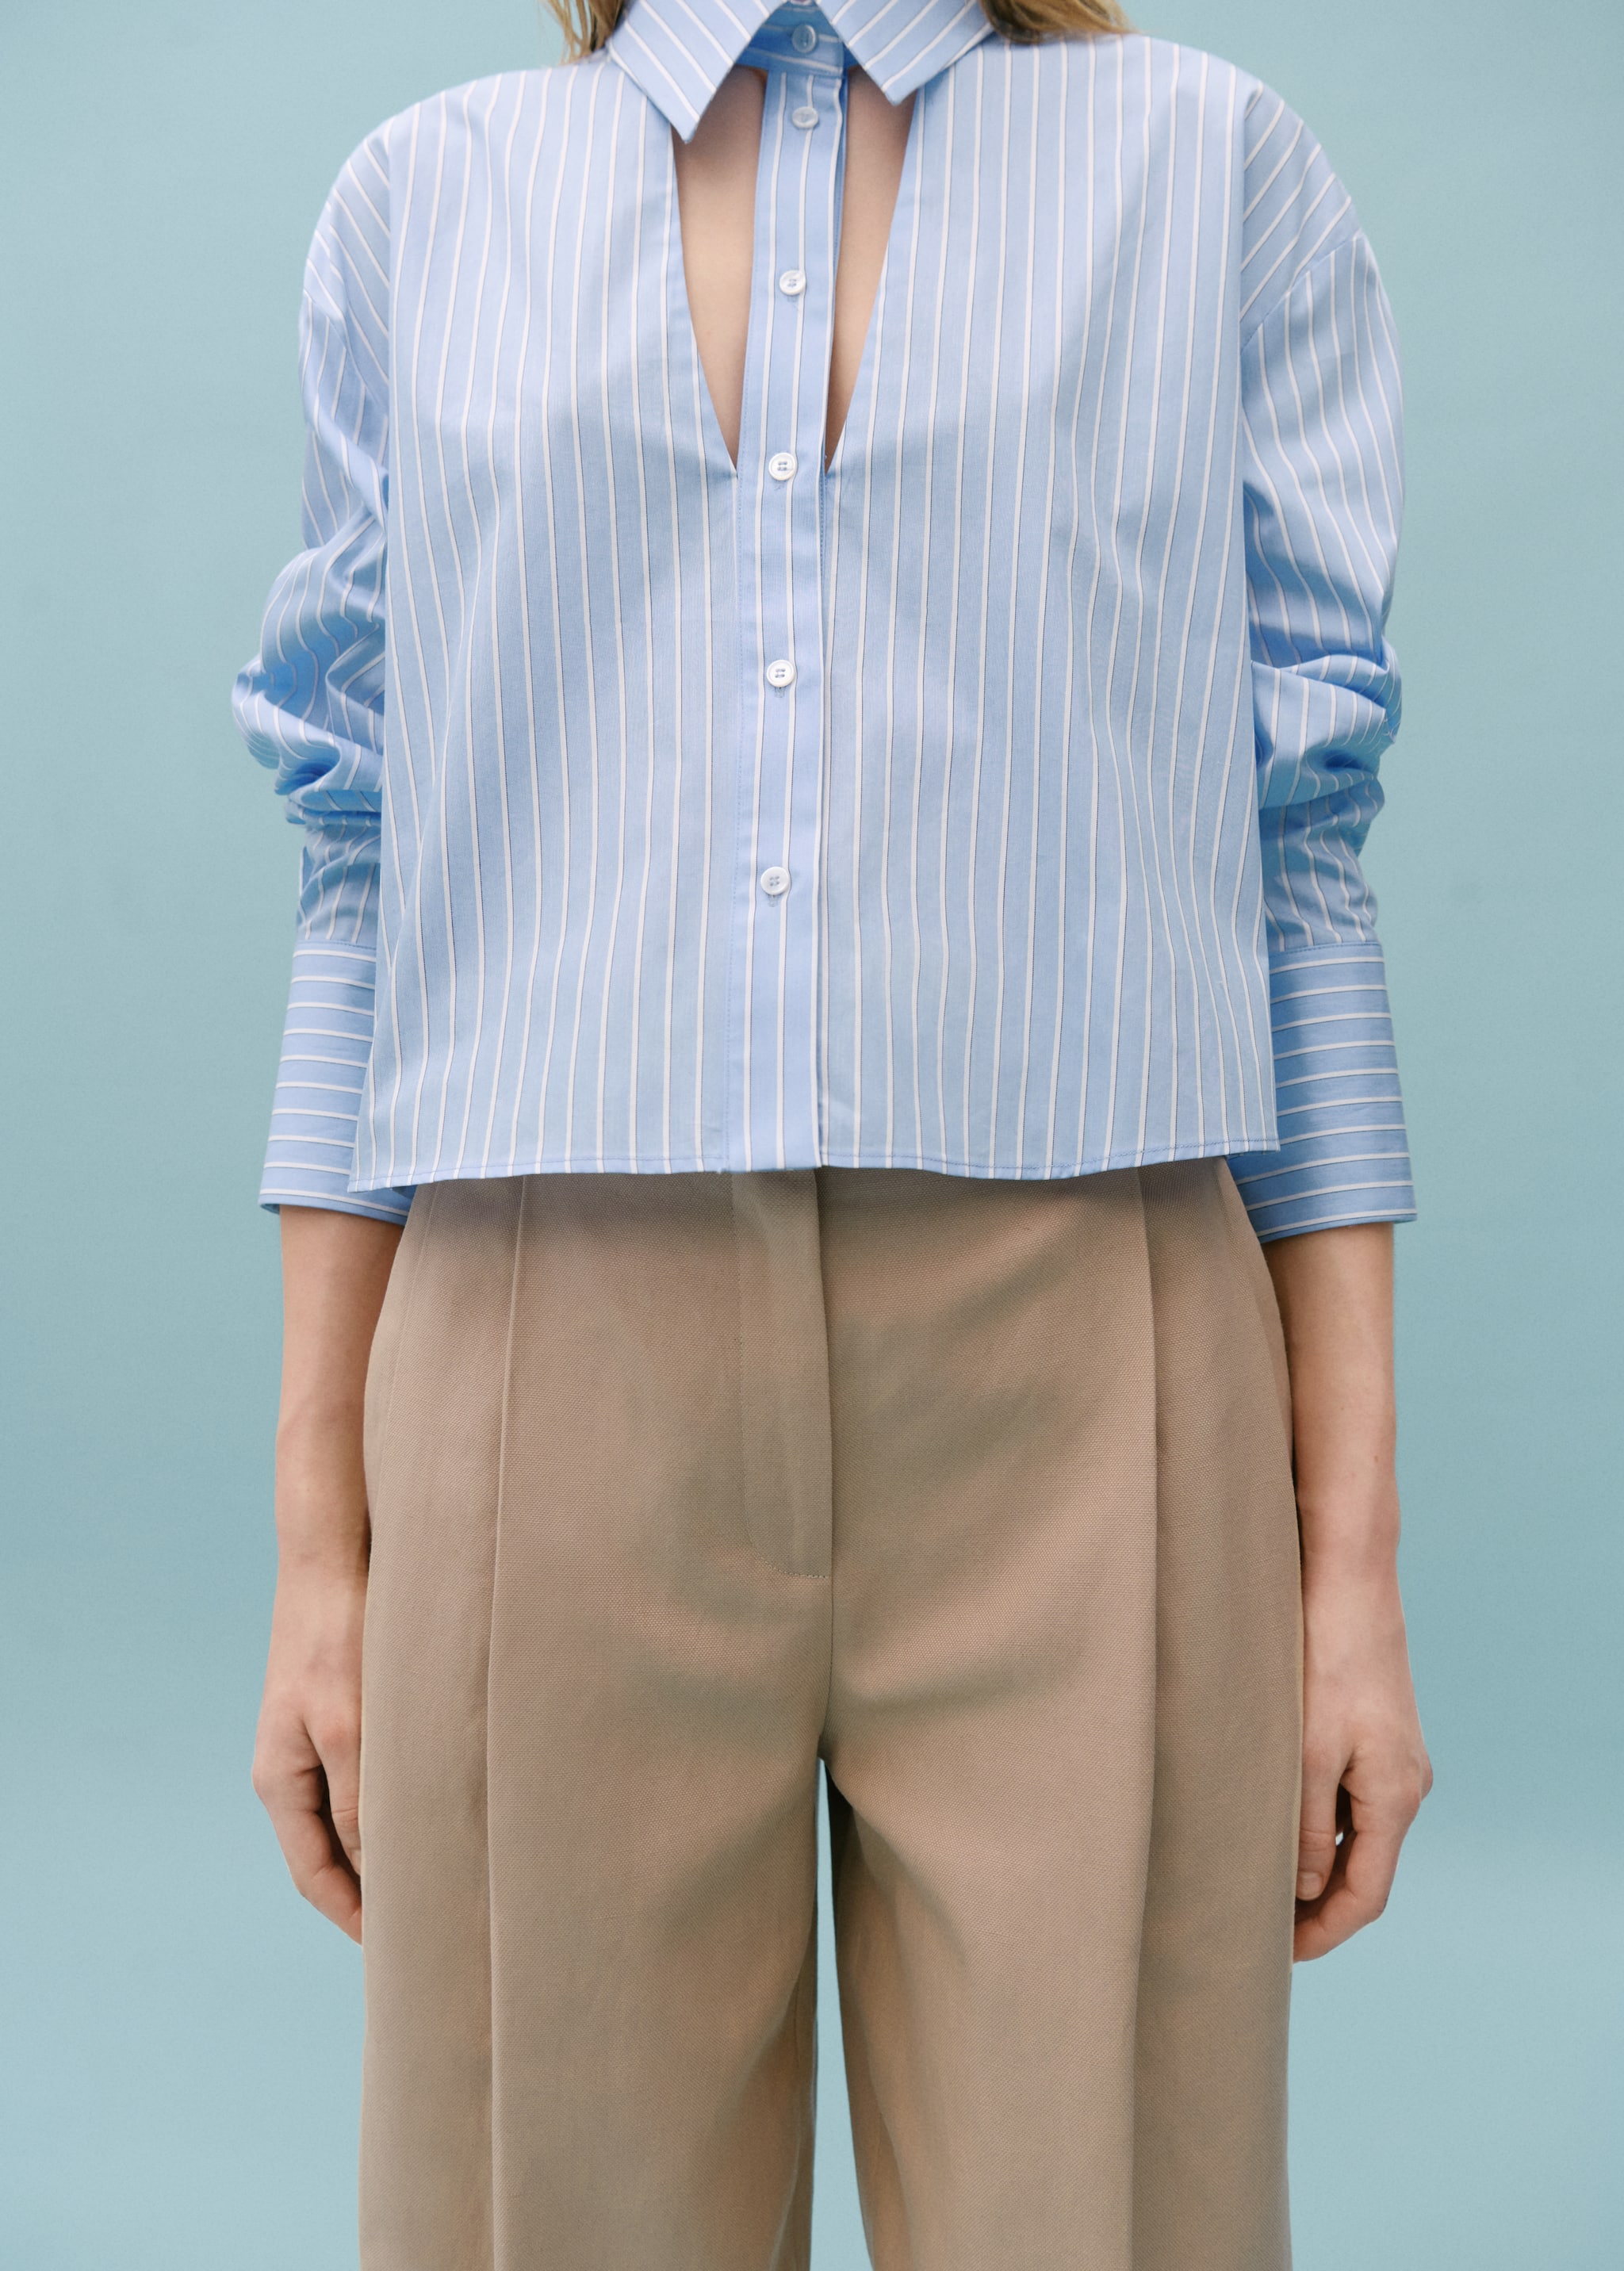 Pleat straight trousers - Details of the article 6